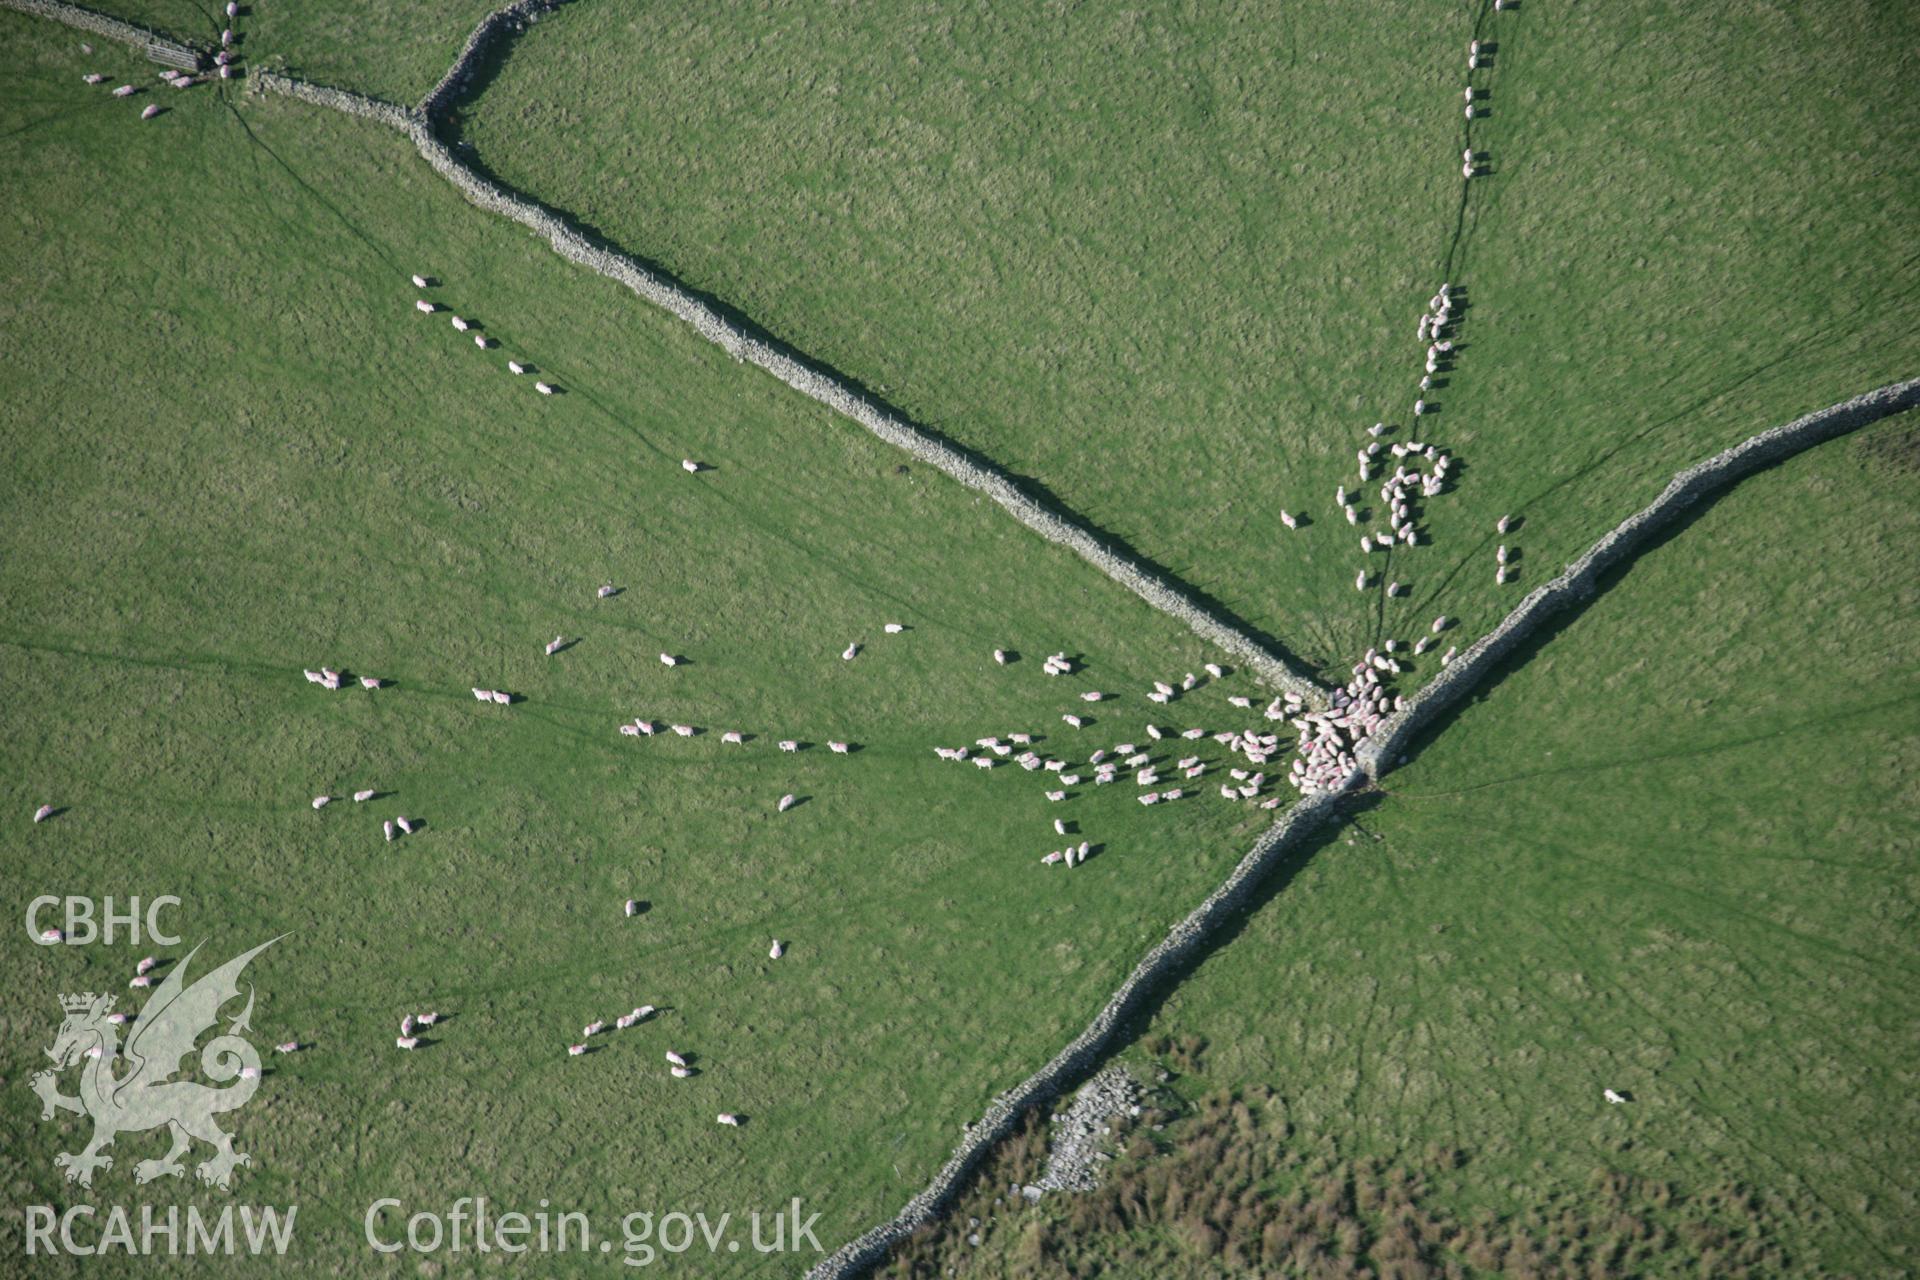 RCAHMW colour oblique aerial photograph showing non-archaeological view of sheep herding on upland pasture, looking towards the west. Taken on 17 October 2005 by Toby Driver